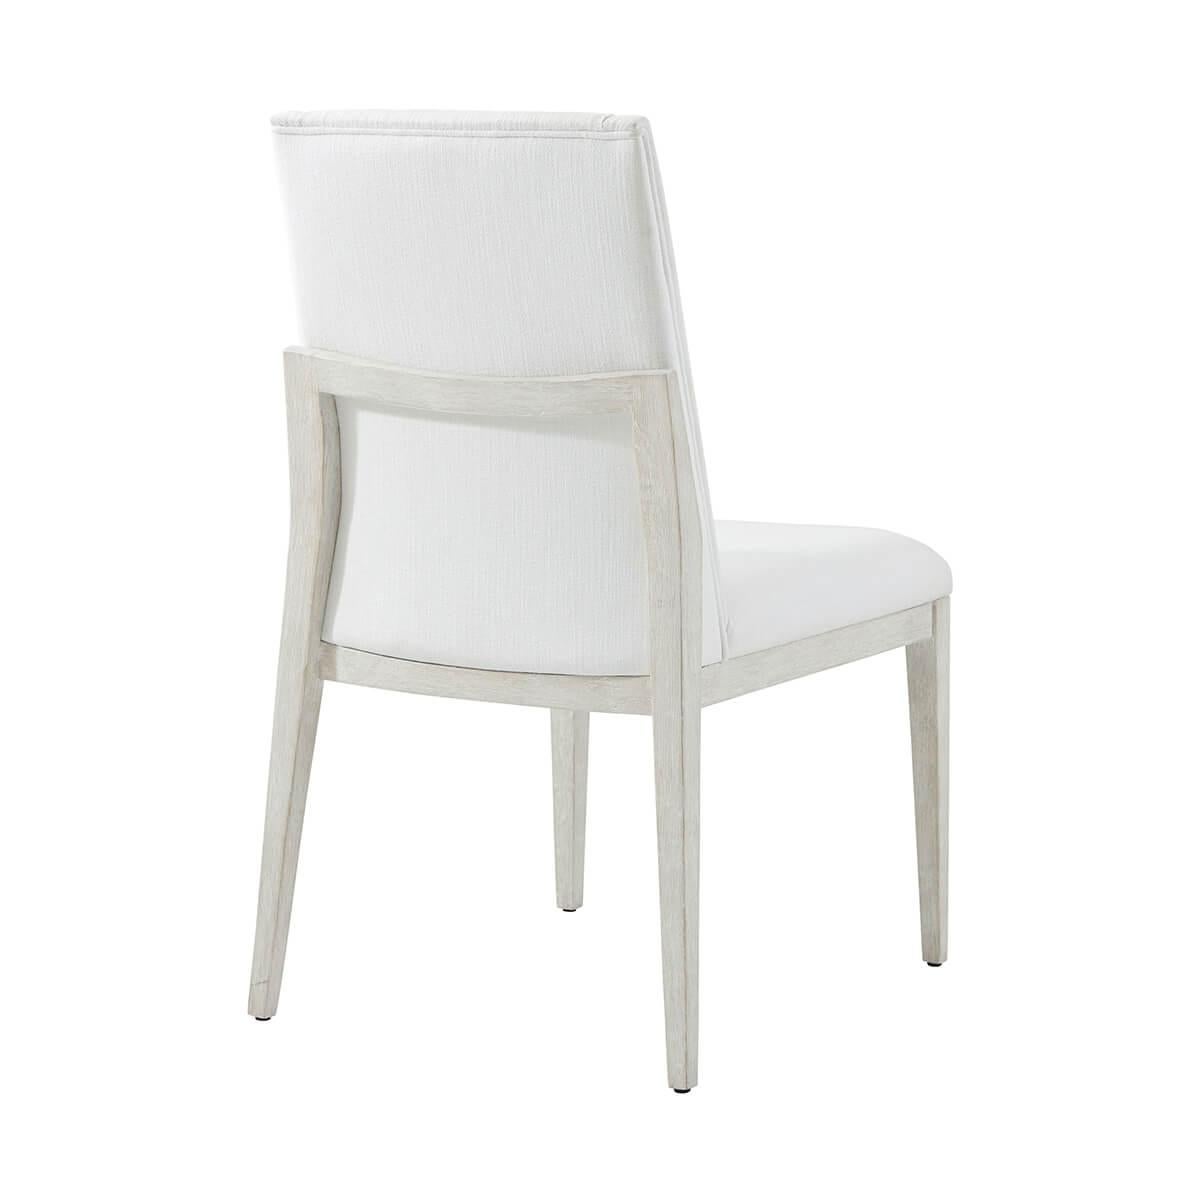 In our Sea Salt finish, the upholstered side chair displays a comfortable upholstered seat with a fully upholstered back. Raised on square tapered legs.

Dimensions: 21.25